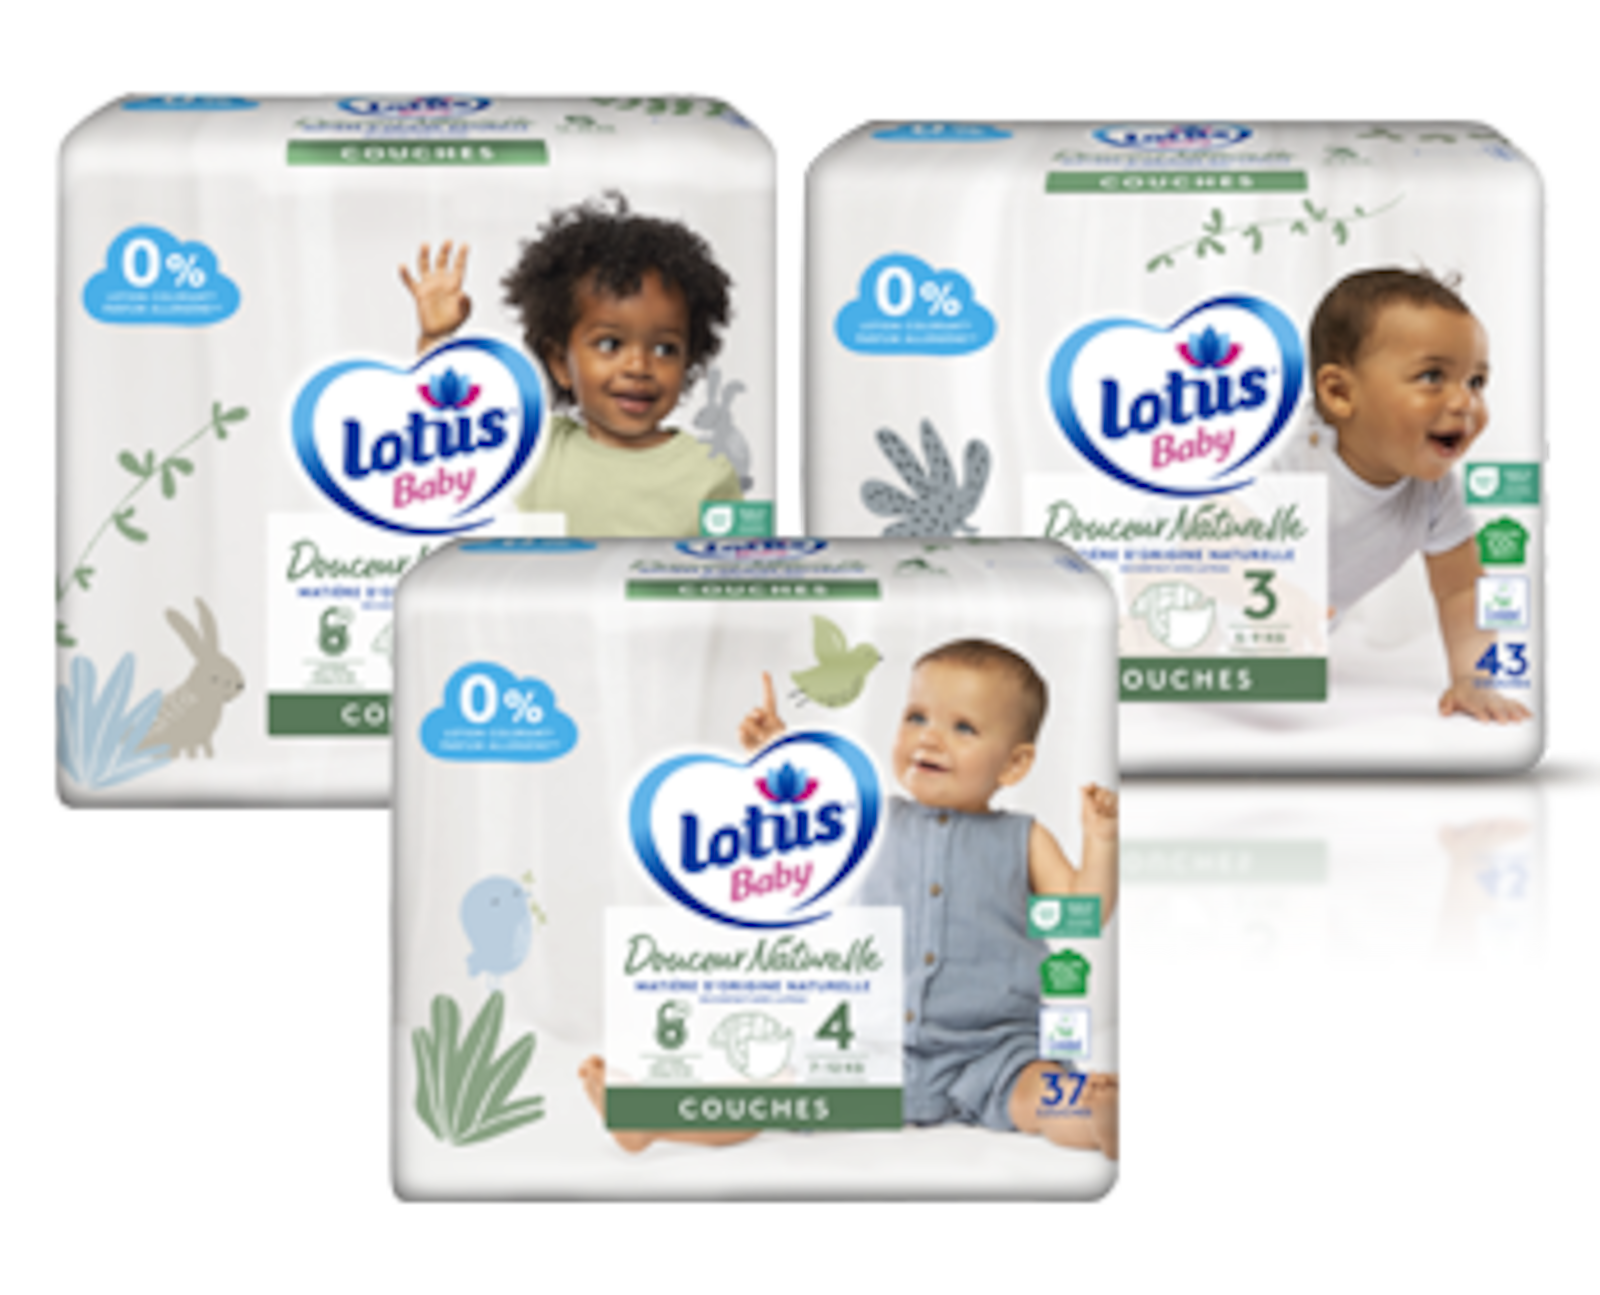 Galerie de photos Lotus Baby Touch - Lotus Baby Touch